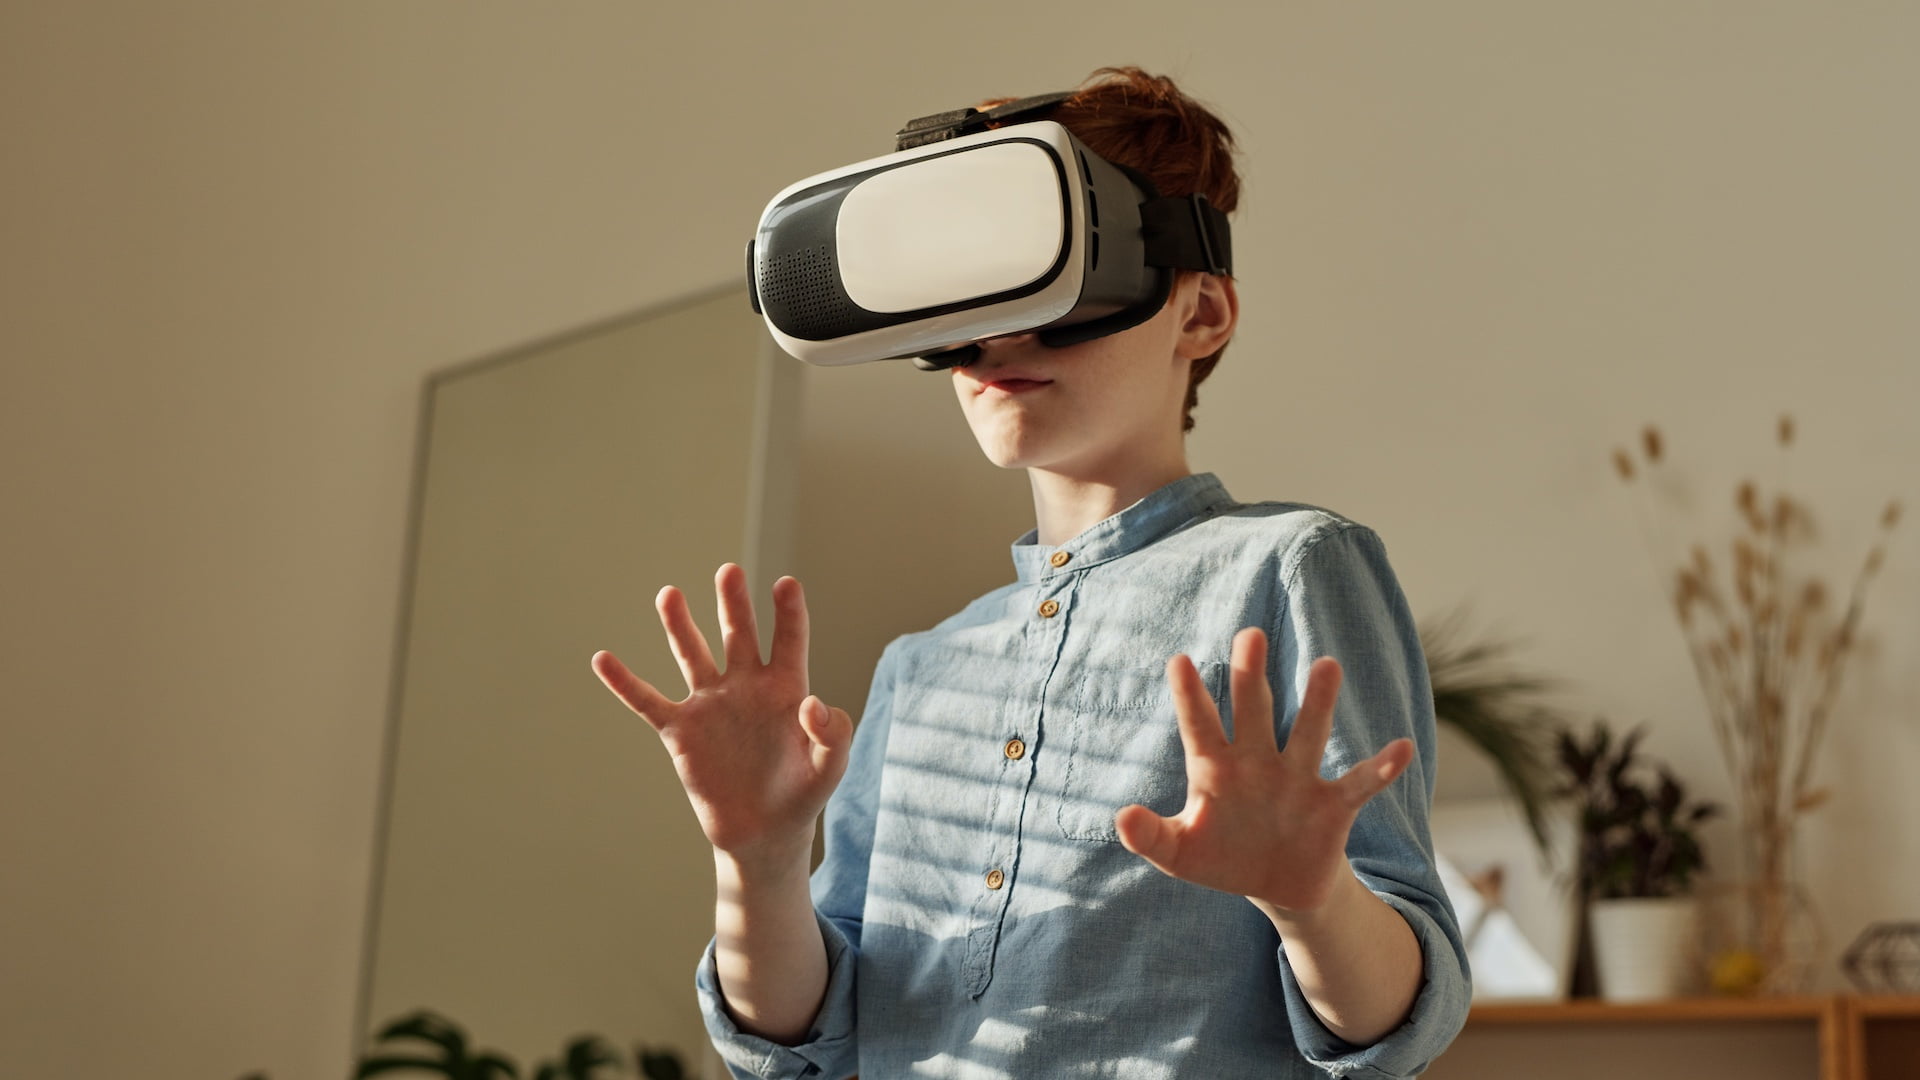 Children and Virtual Reality: Do they need more protection?